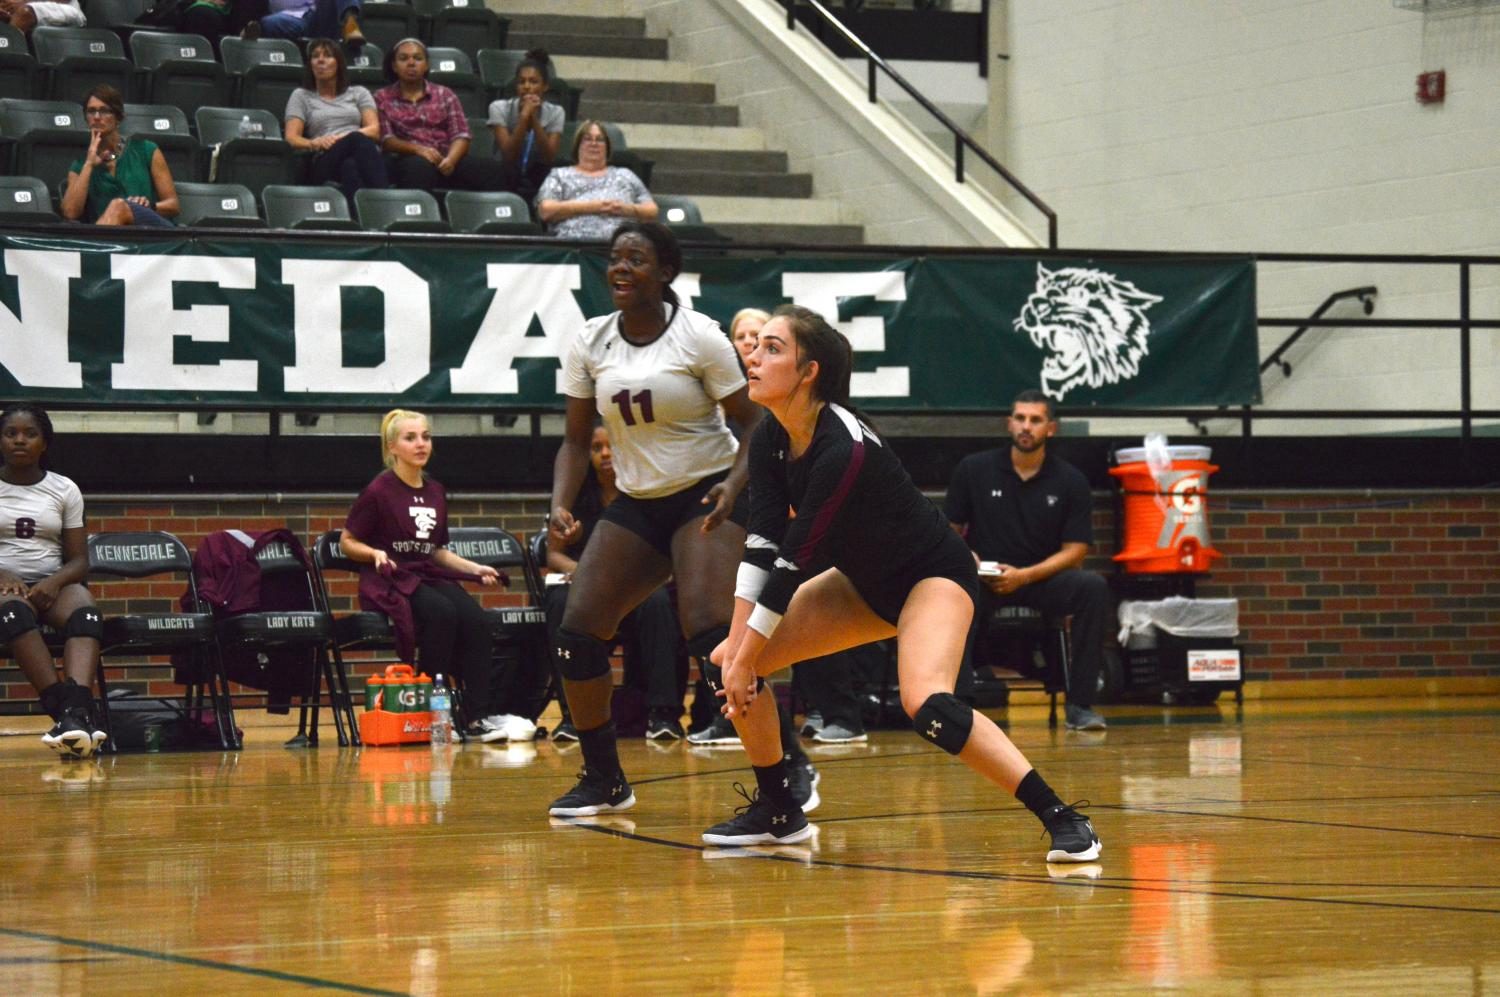 Girls Volleyball Team Gears Up for District